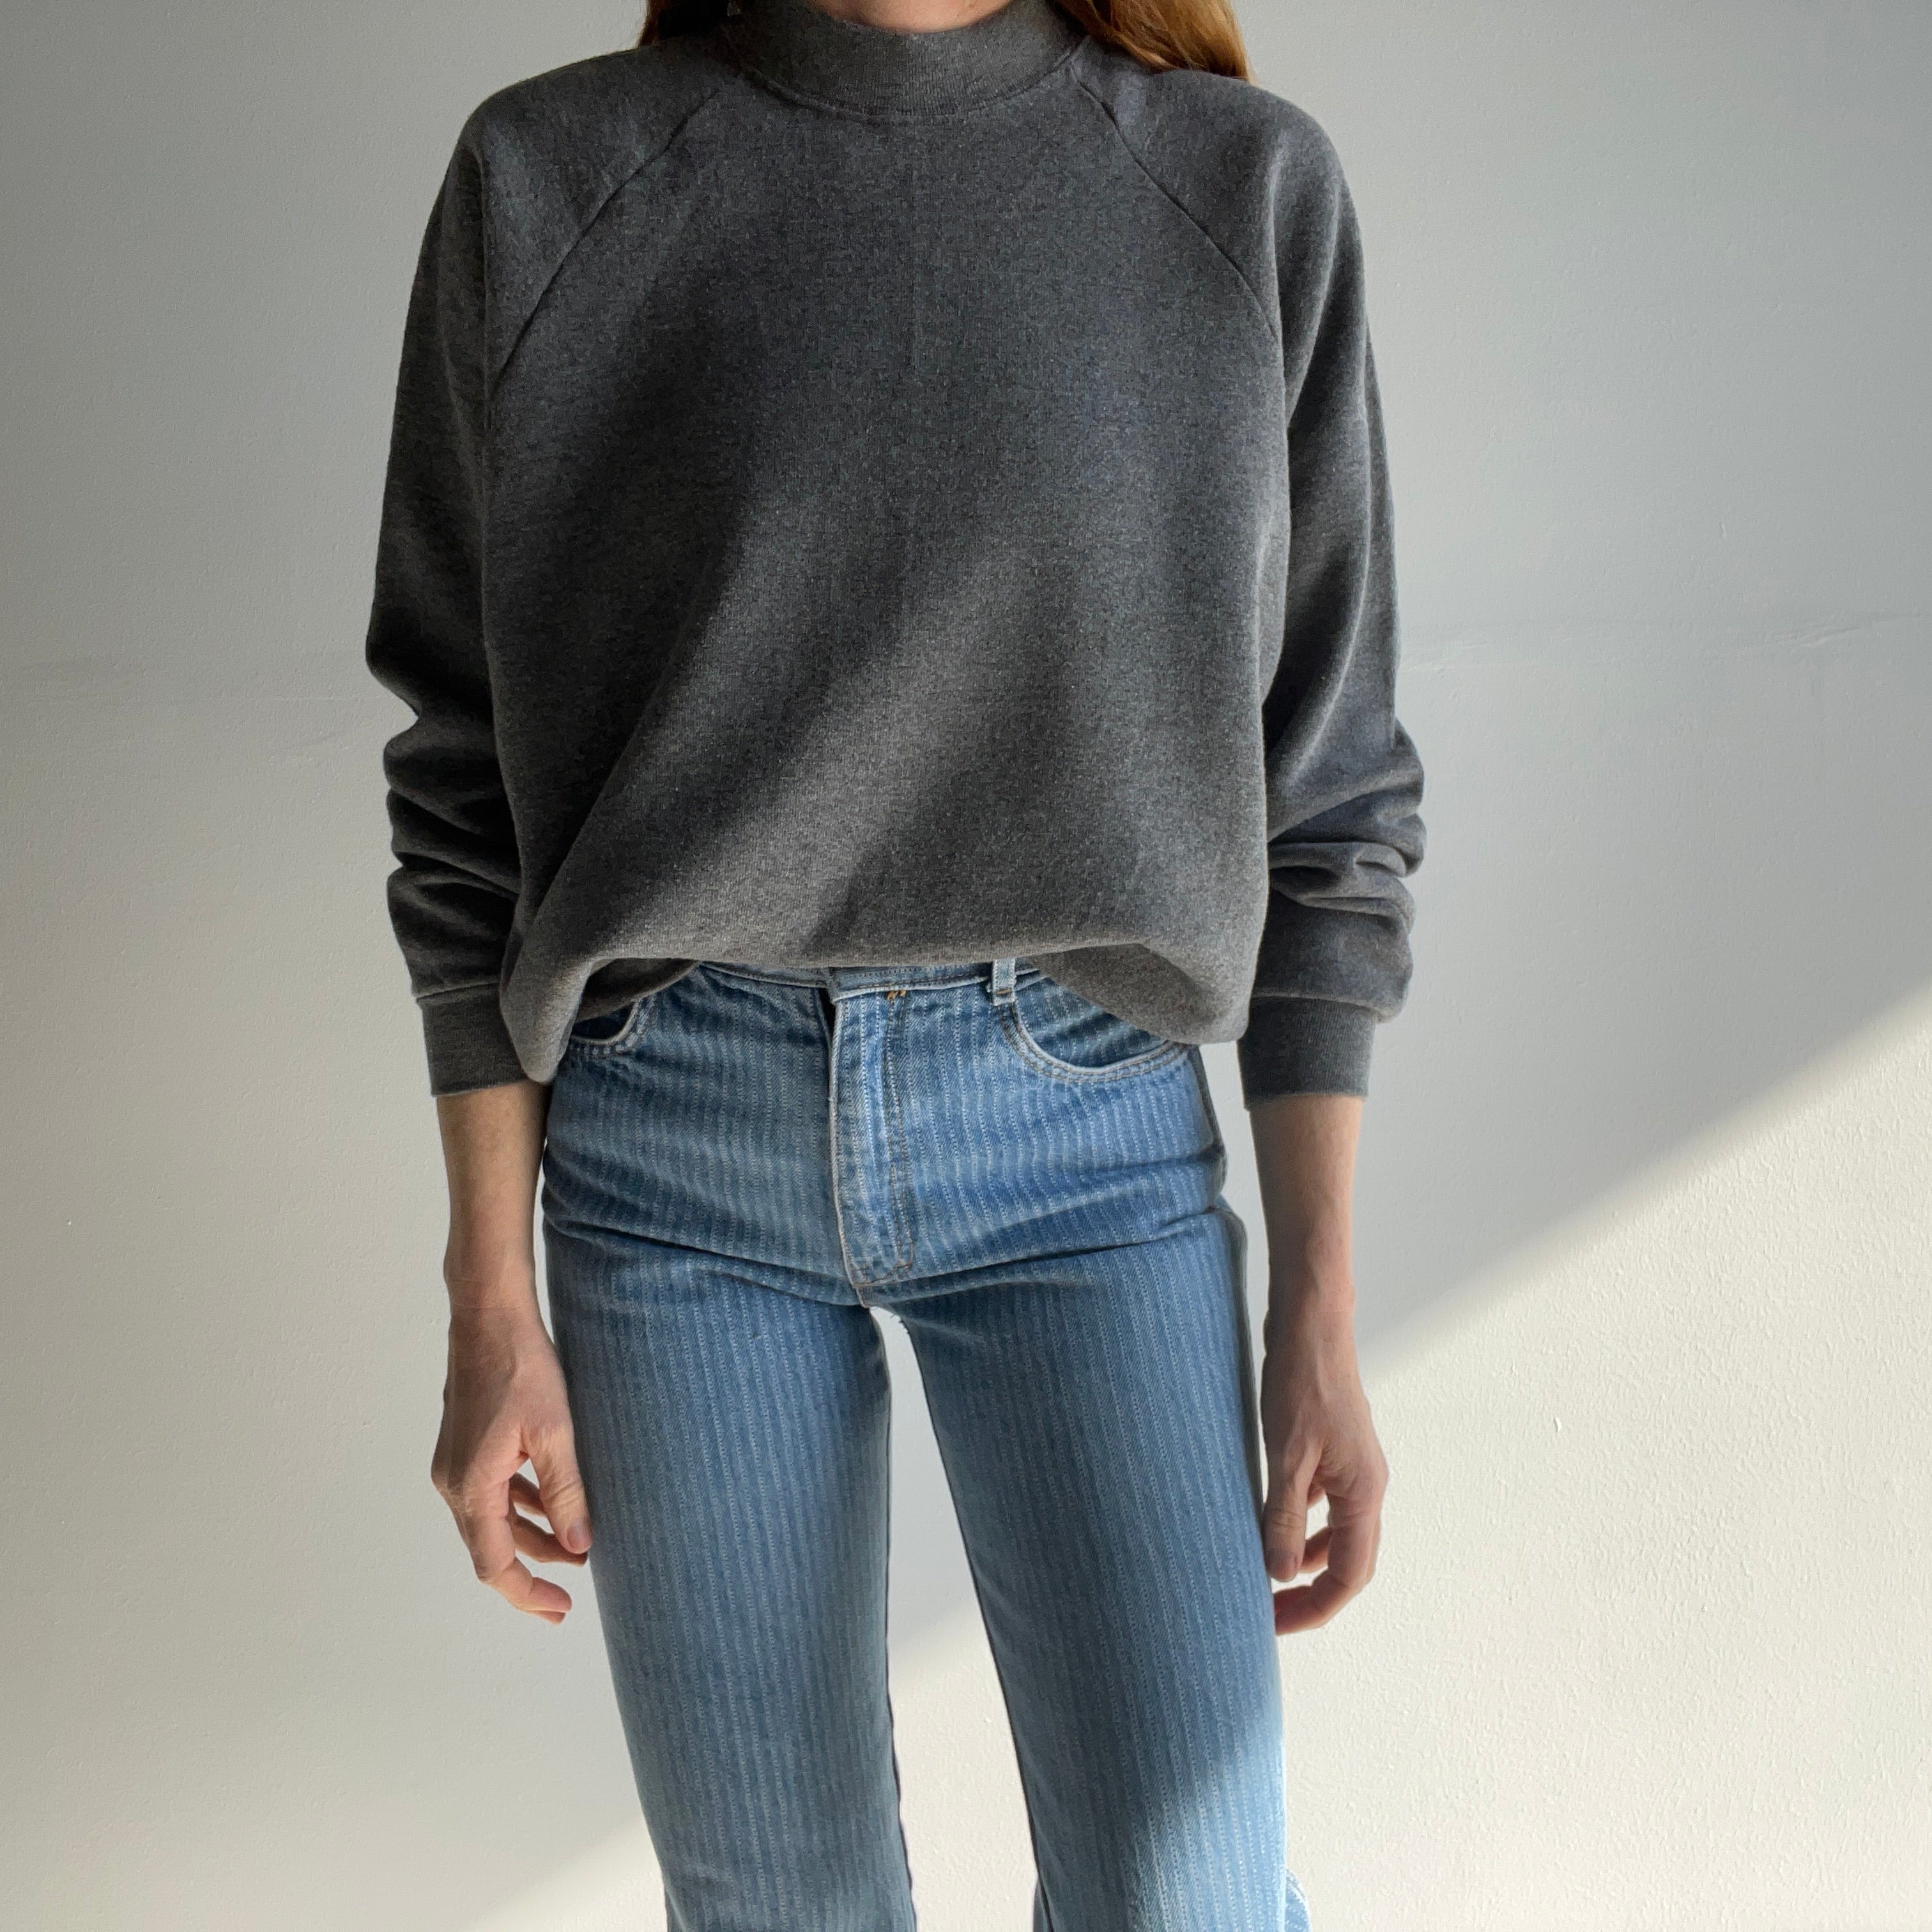 1980s Most Delightful and Cozy Deep Gray FOTL Sweatshirt I Ever Did See